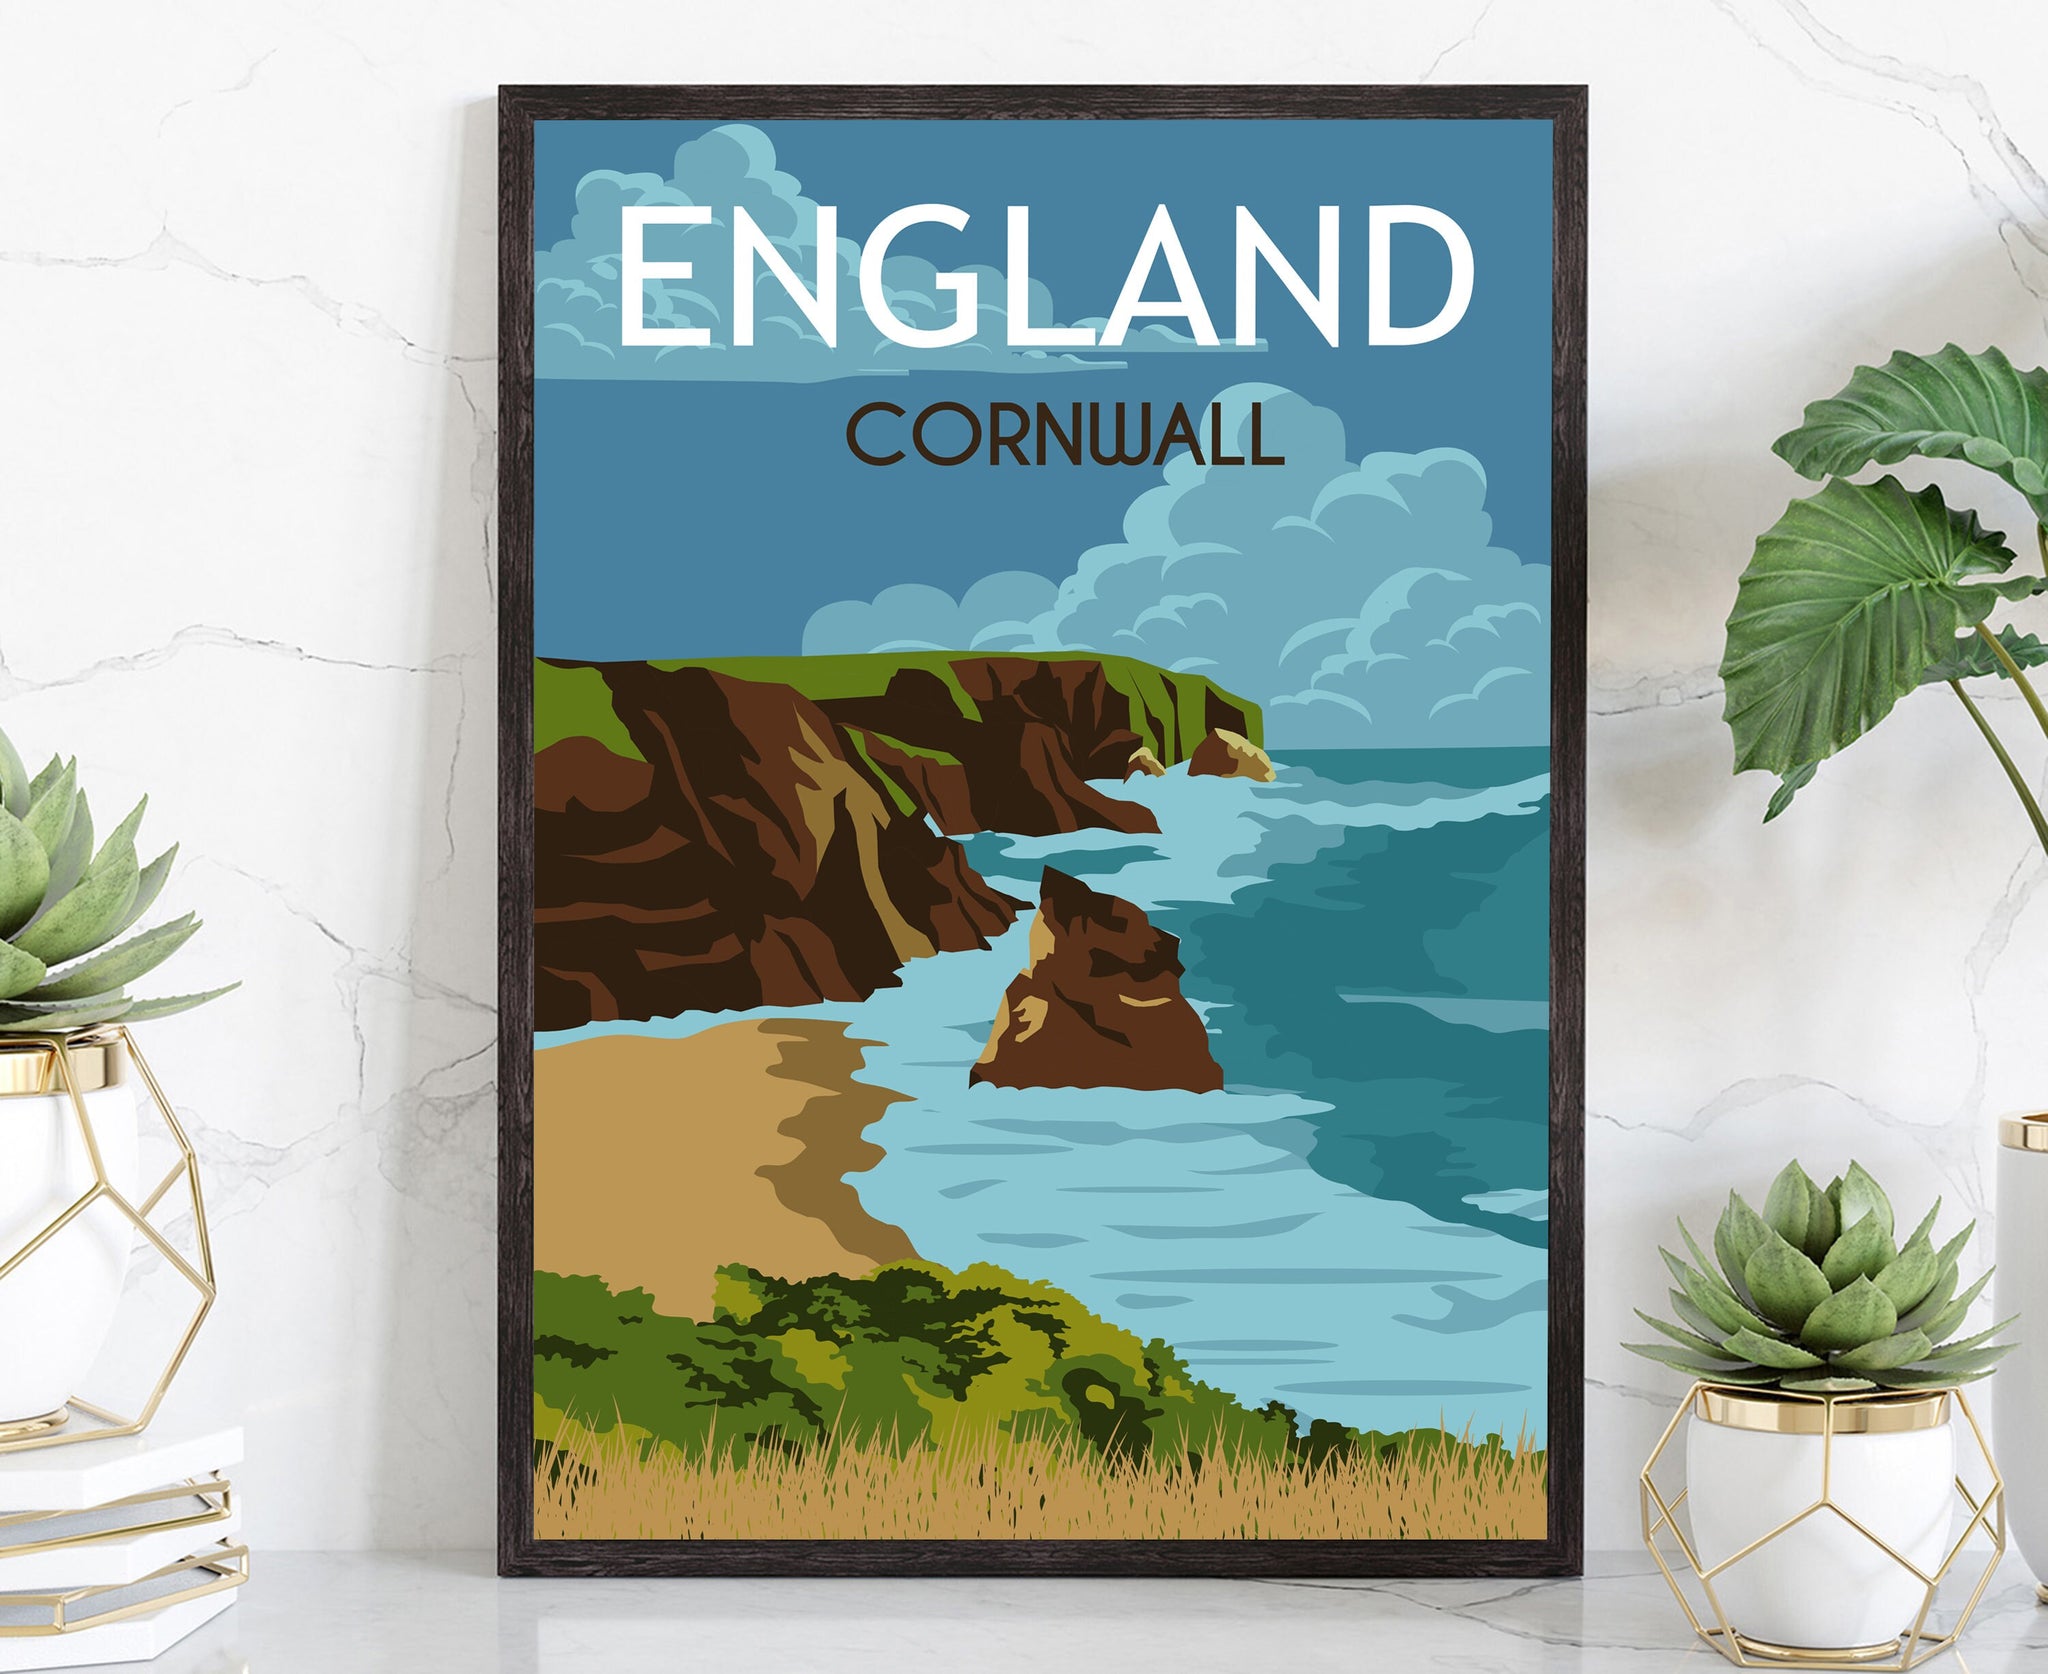 ENGLAND CORNWALL retro travel poster, England Cornwall cityscape poster, Cornwall landmark poster, Home wall art, Office wall decoration